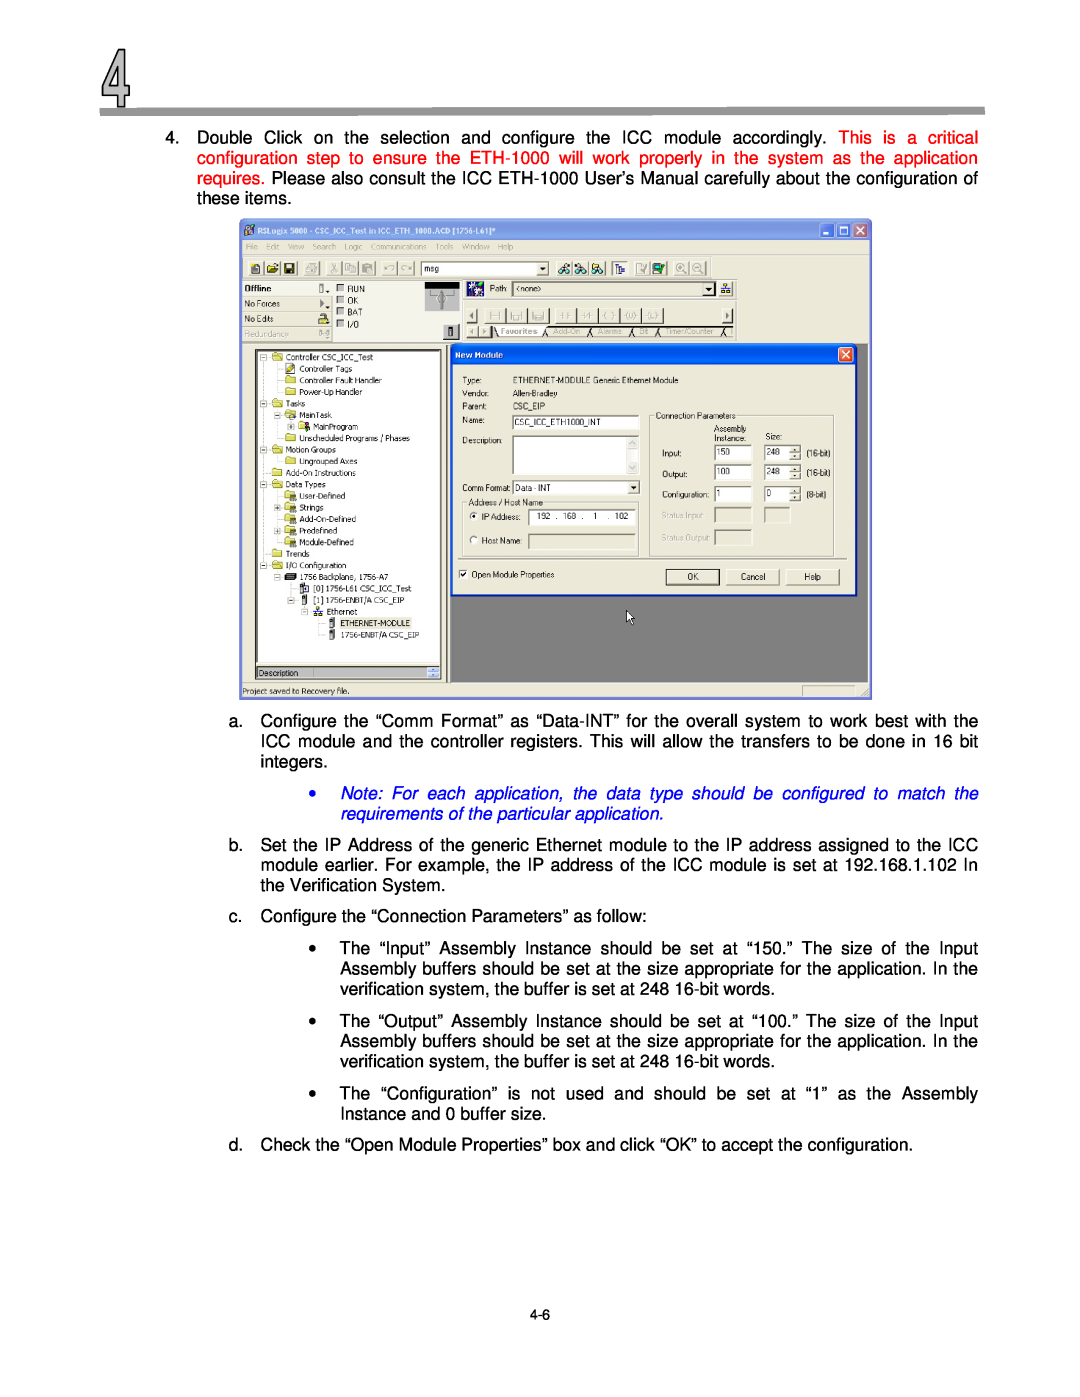 Mitsubishi Electronics ETH-1000 manual c. Configure the “Connection Parameters” as follow 